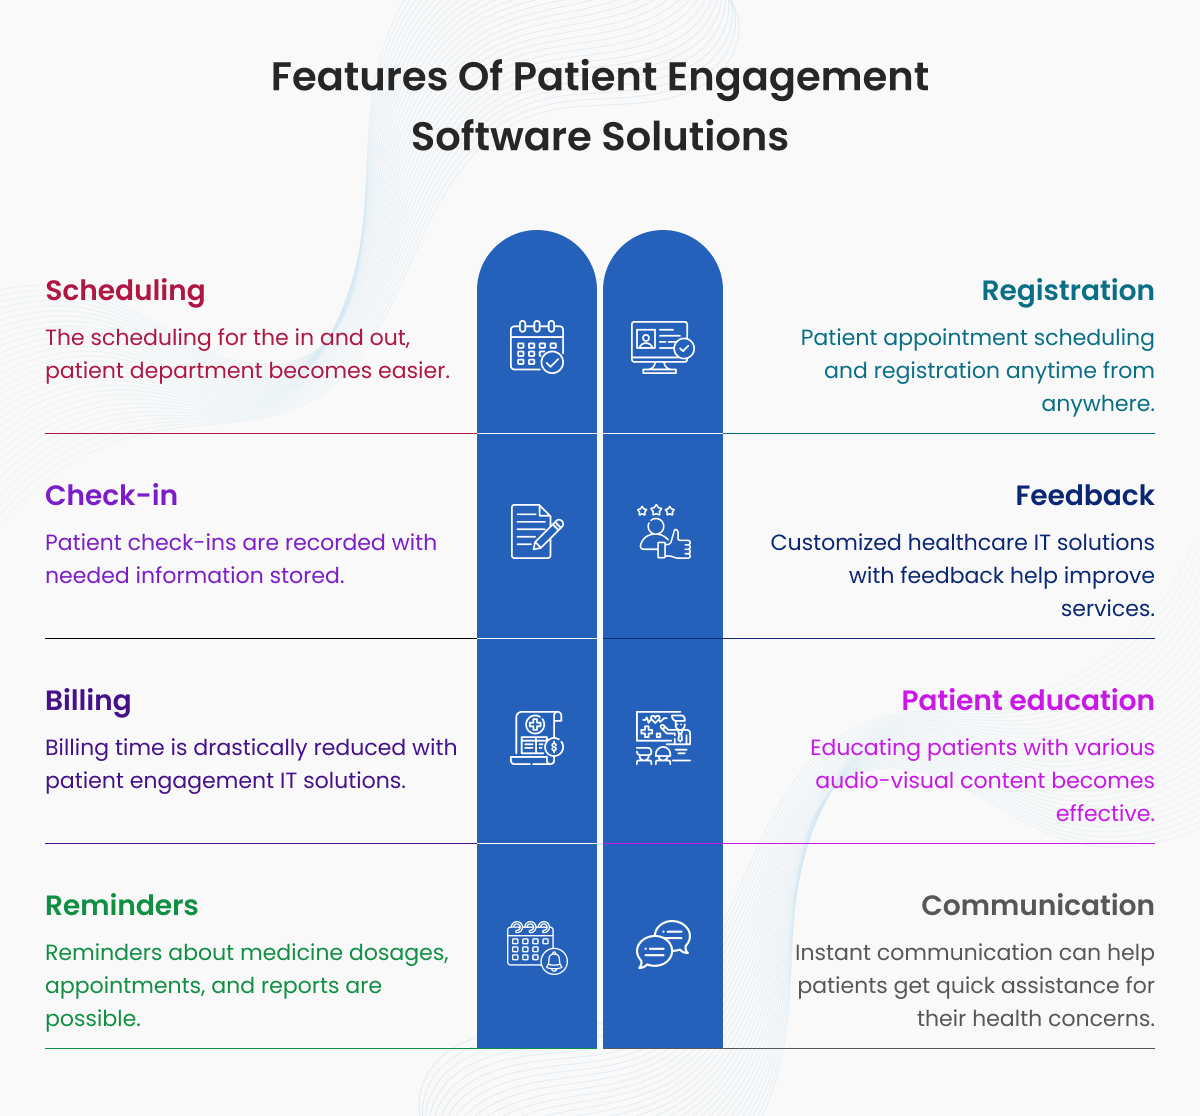 Features of Patient Engagement Software Solutions